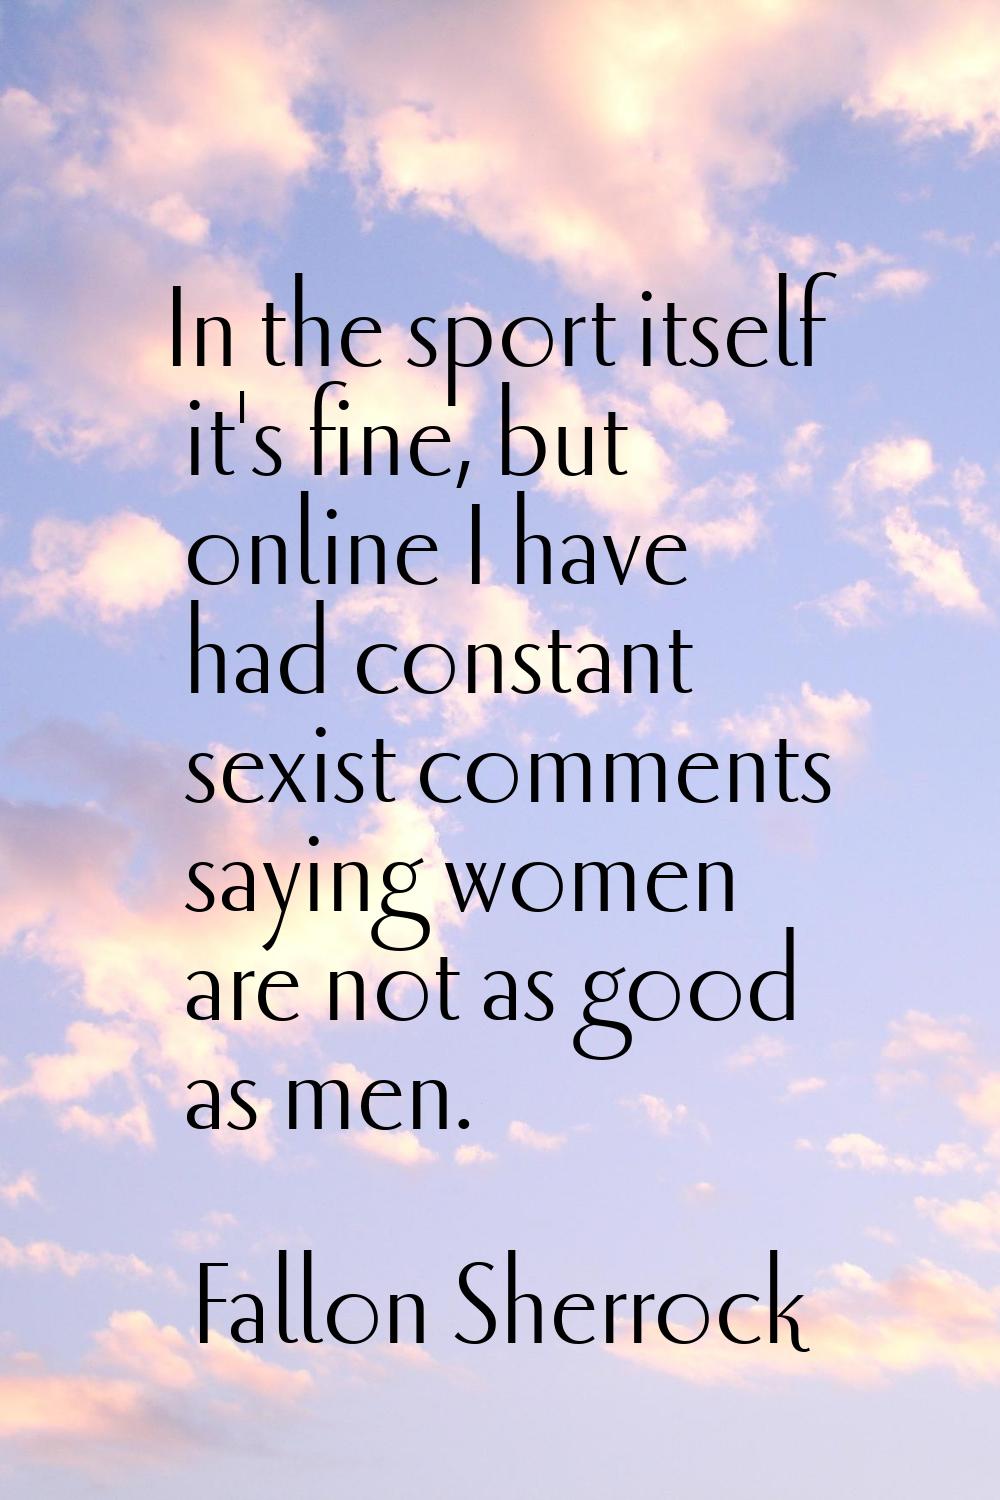 In the sport itself it's fine, but online I have had constant sexist comments saying women are not 